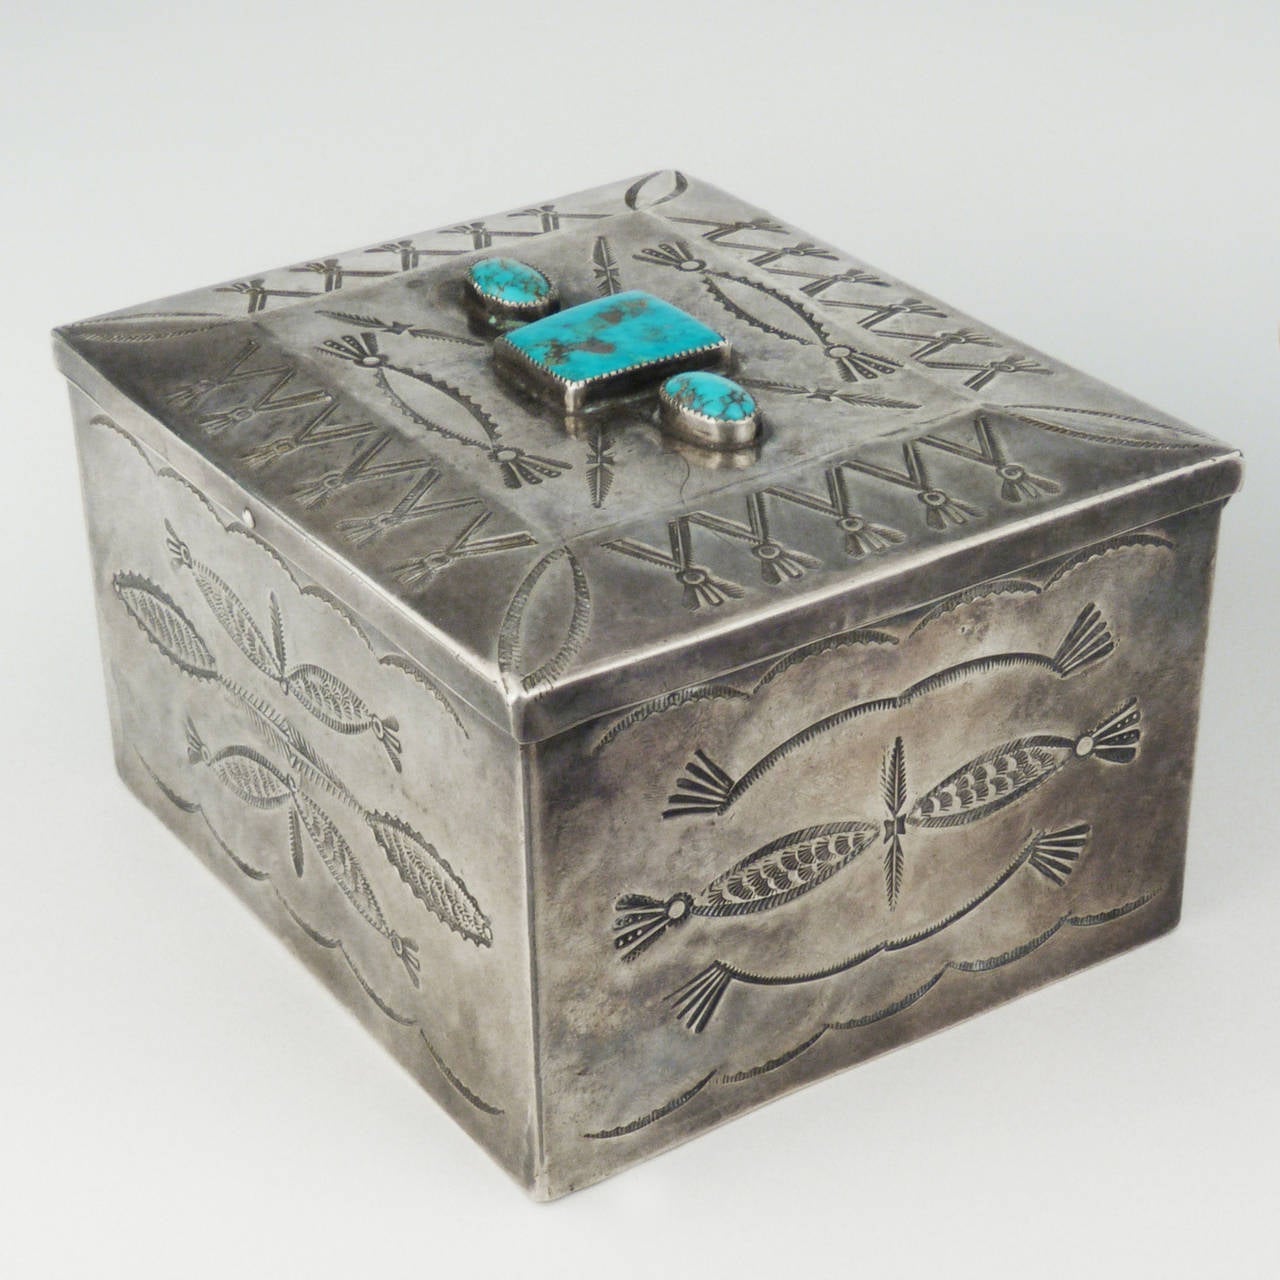 A beautiful handmade Navajo sterling silver box from the 1940's, with intricate stamp work on five sides, hinged and set with three turquoise cabochons. The largest piece of turquoise is identifiable as being from the Morenci mine in Arizona. 3 1/2